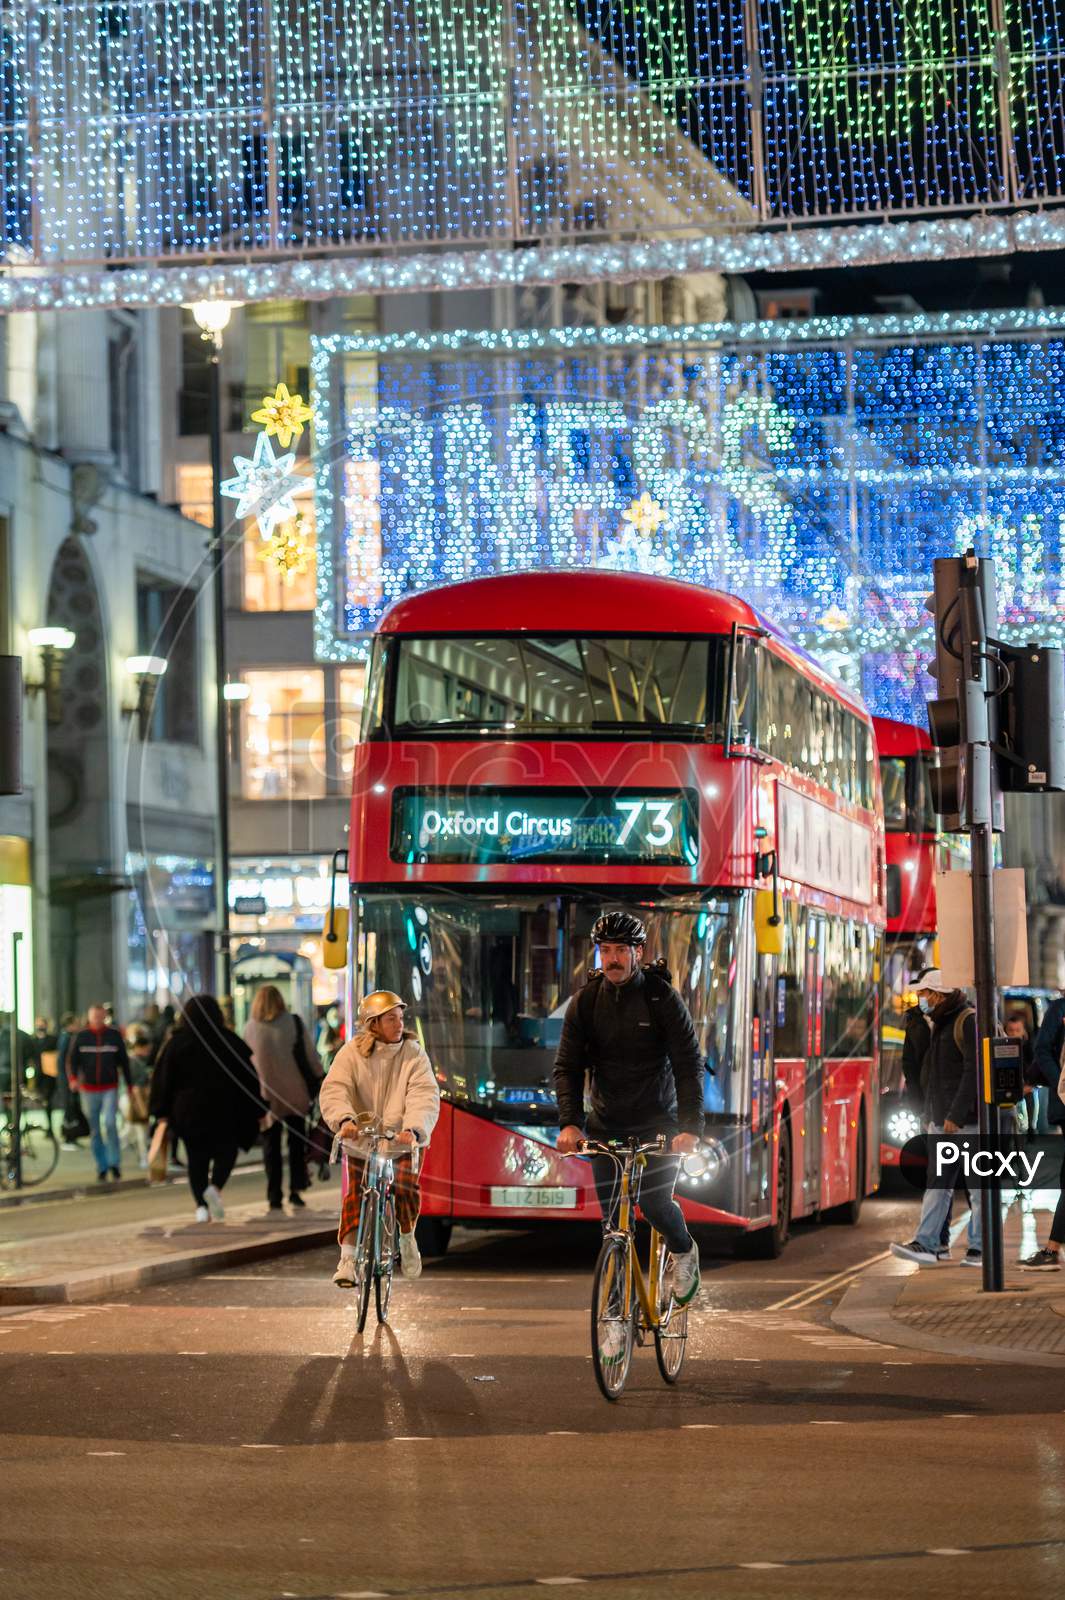 Cyclists Ahead Of A Red London Double Decker Bus With Oxford Street Illuminated Christmas Decorations In The Background